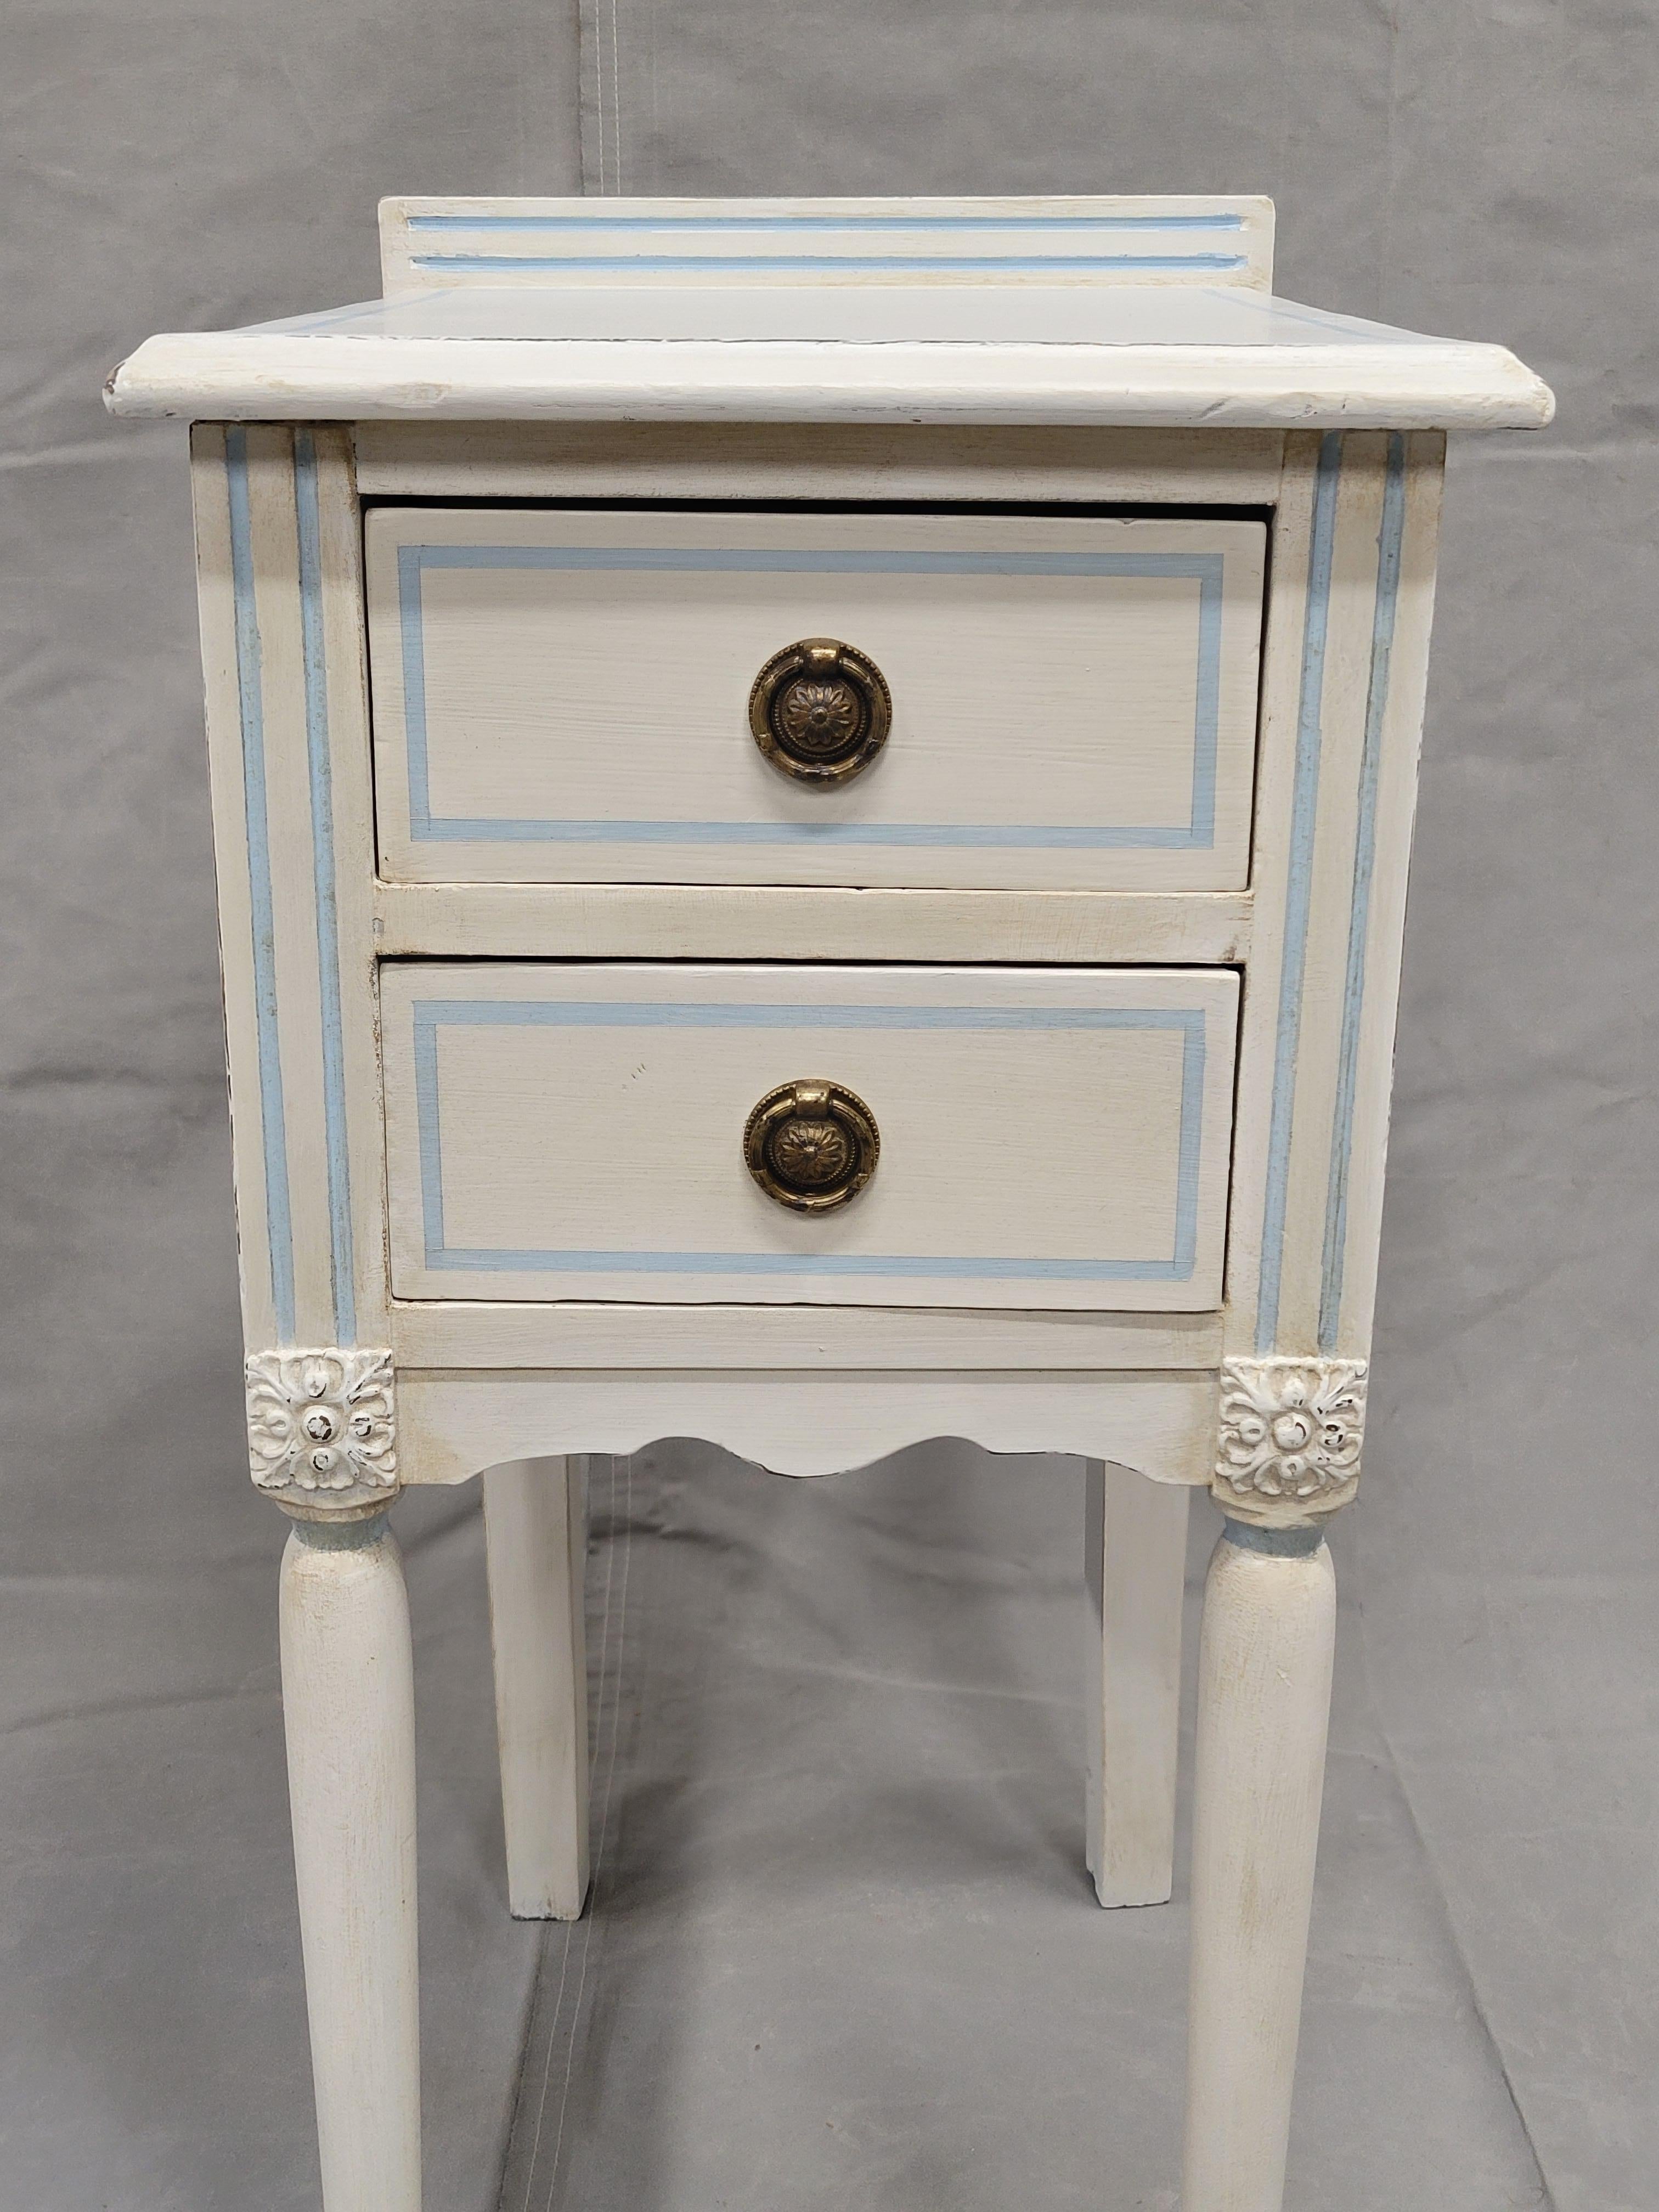 American Vintage White Nightstands With Blue Striping - a Pair